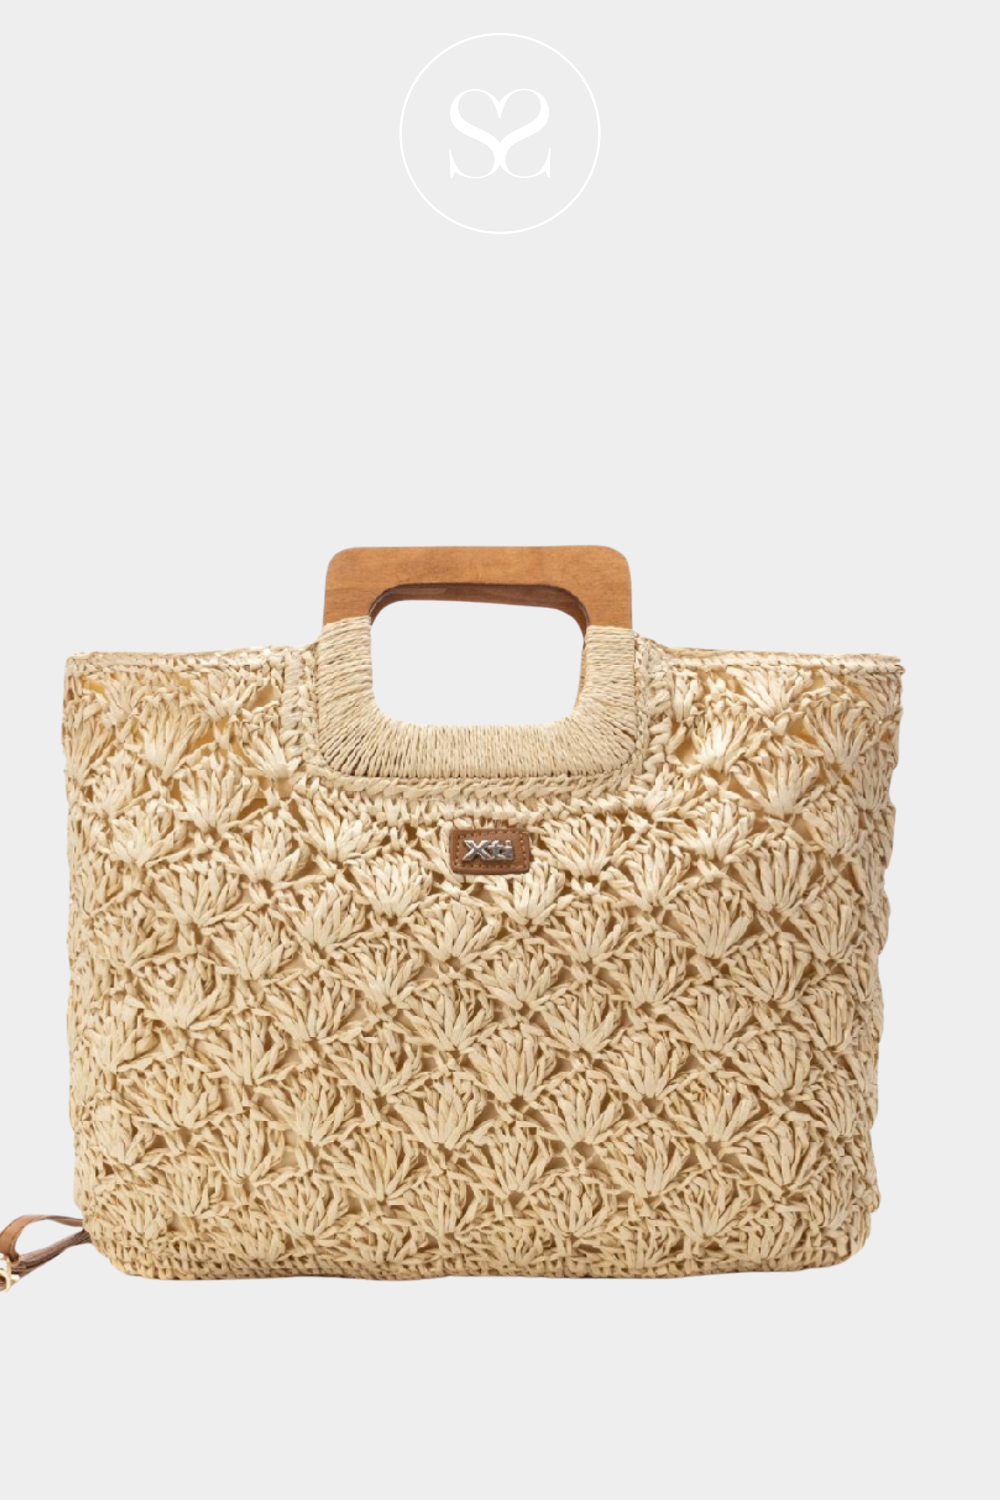 XTI 184283 CREAM RAFTAN BEACH TOTE WITH WOODEN HANDLES, COMES WITH ADDITIONAL THIN LEATHER STRAP